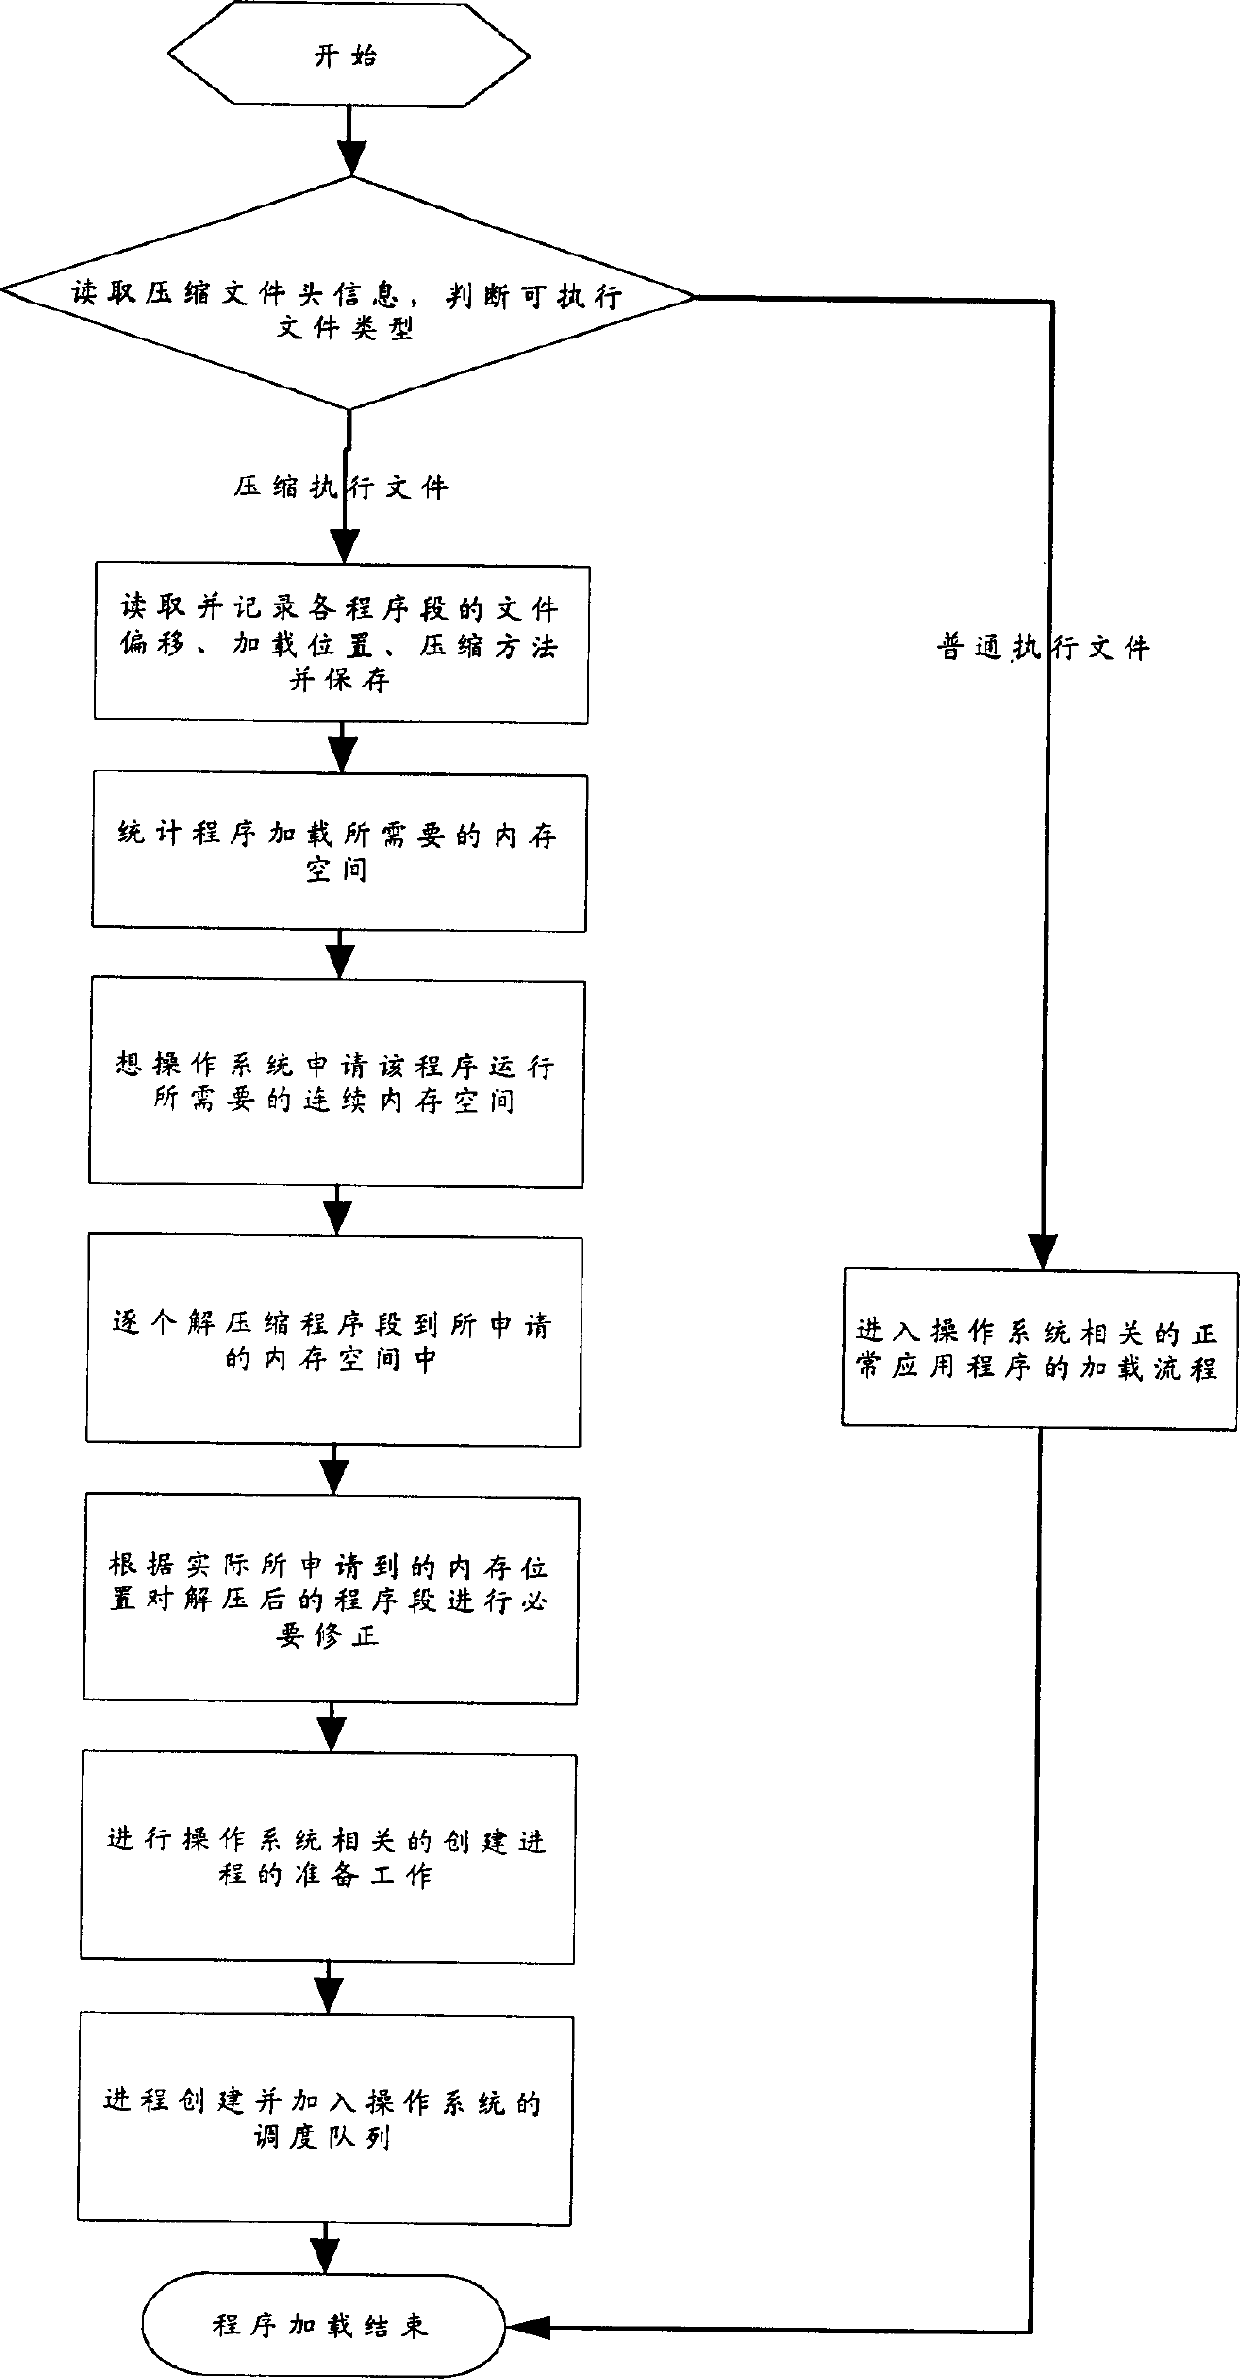 Compression of executable document in embedded type system and its loading method